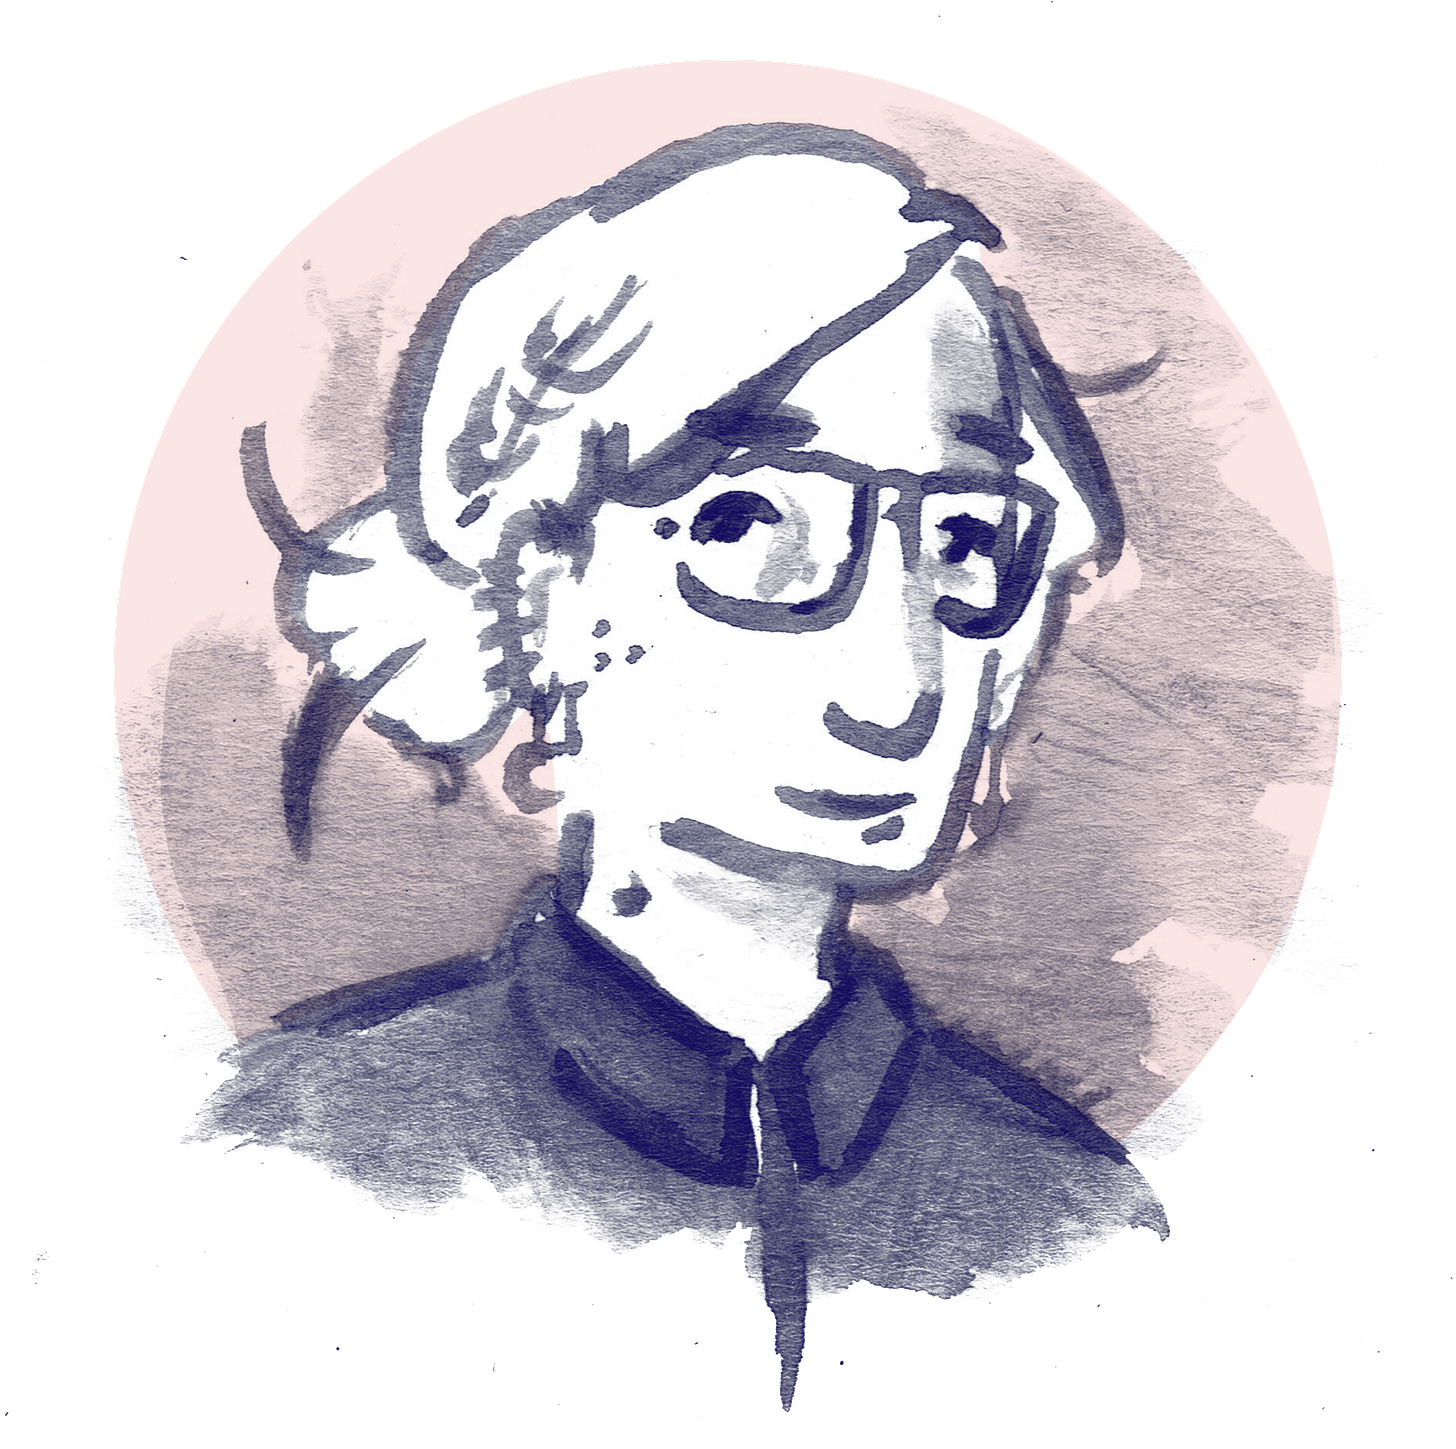 profile picture of the author. she has messy blonde hair in a bun, glasses and some spots on her face. she's wearing a button-up shirt.